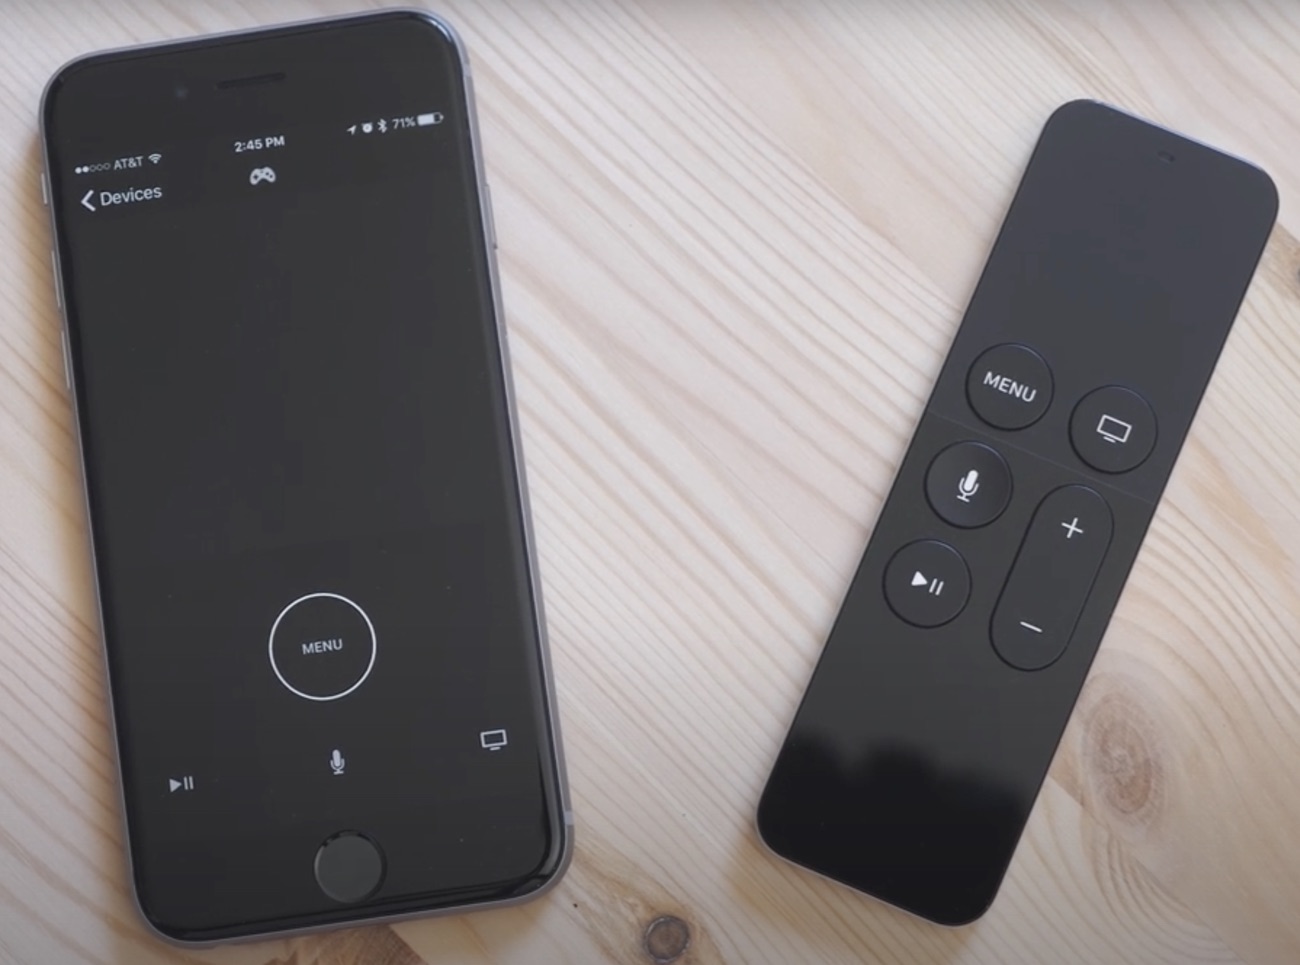 Apple's TV Remote App Pulled App Store Since Functionality is Available in Control Center MacRumors